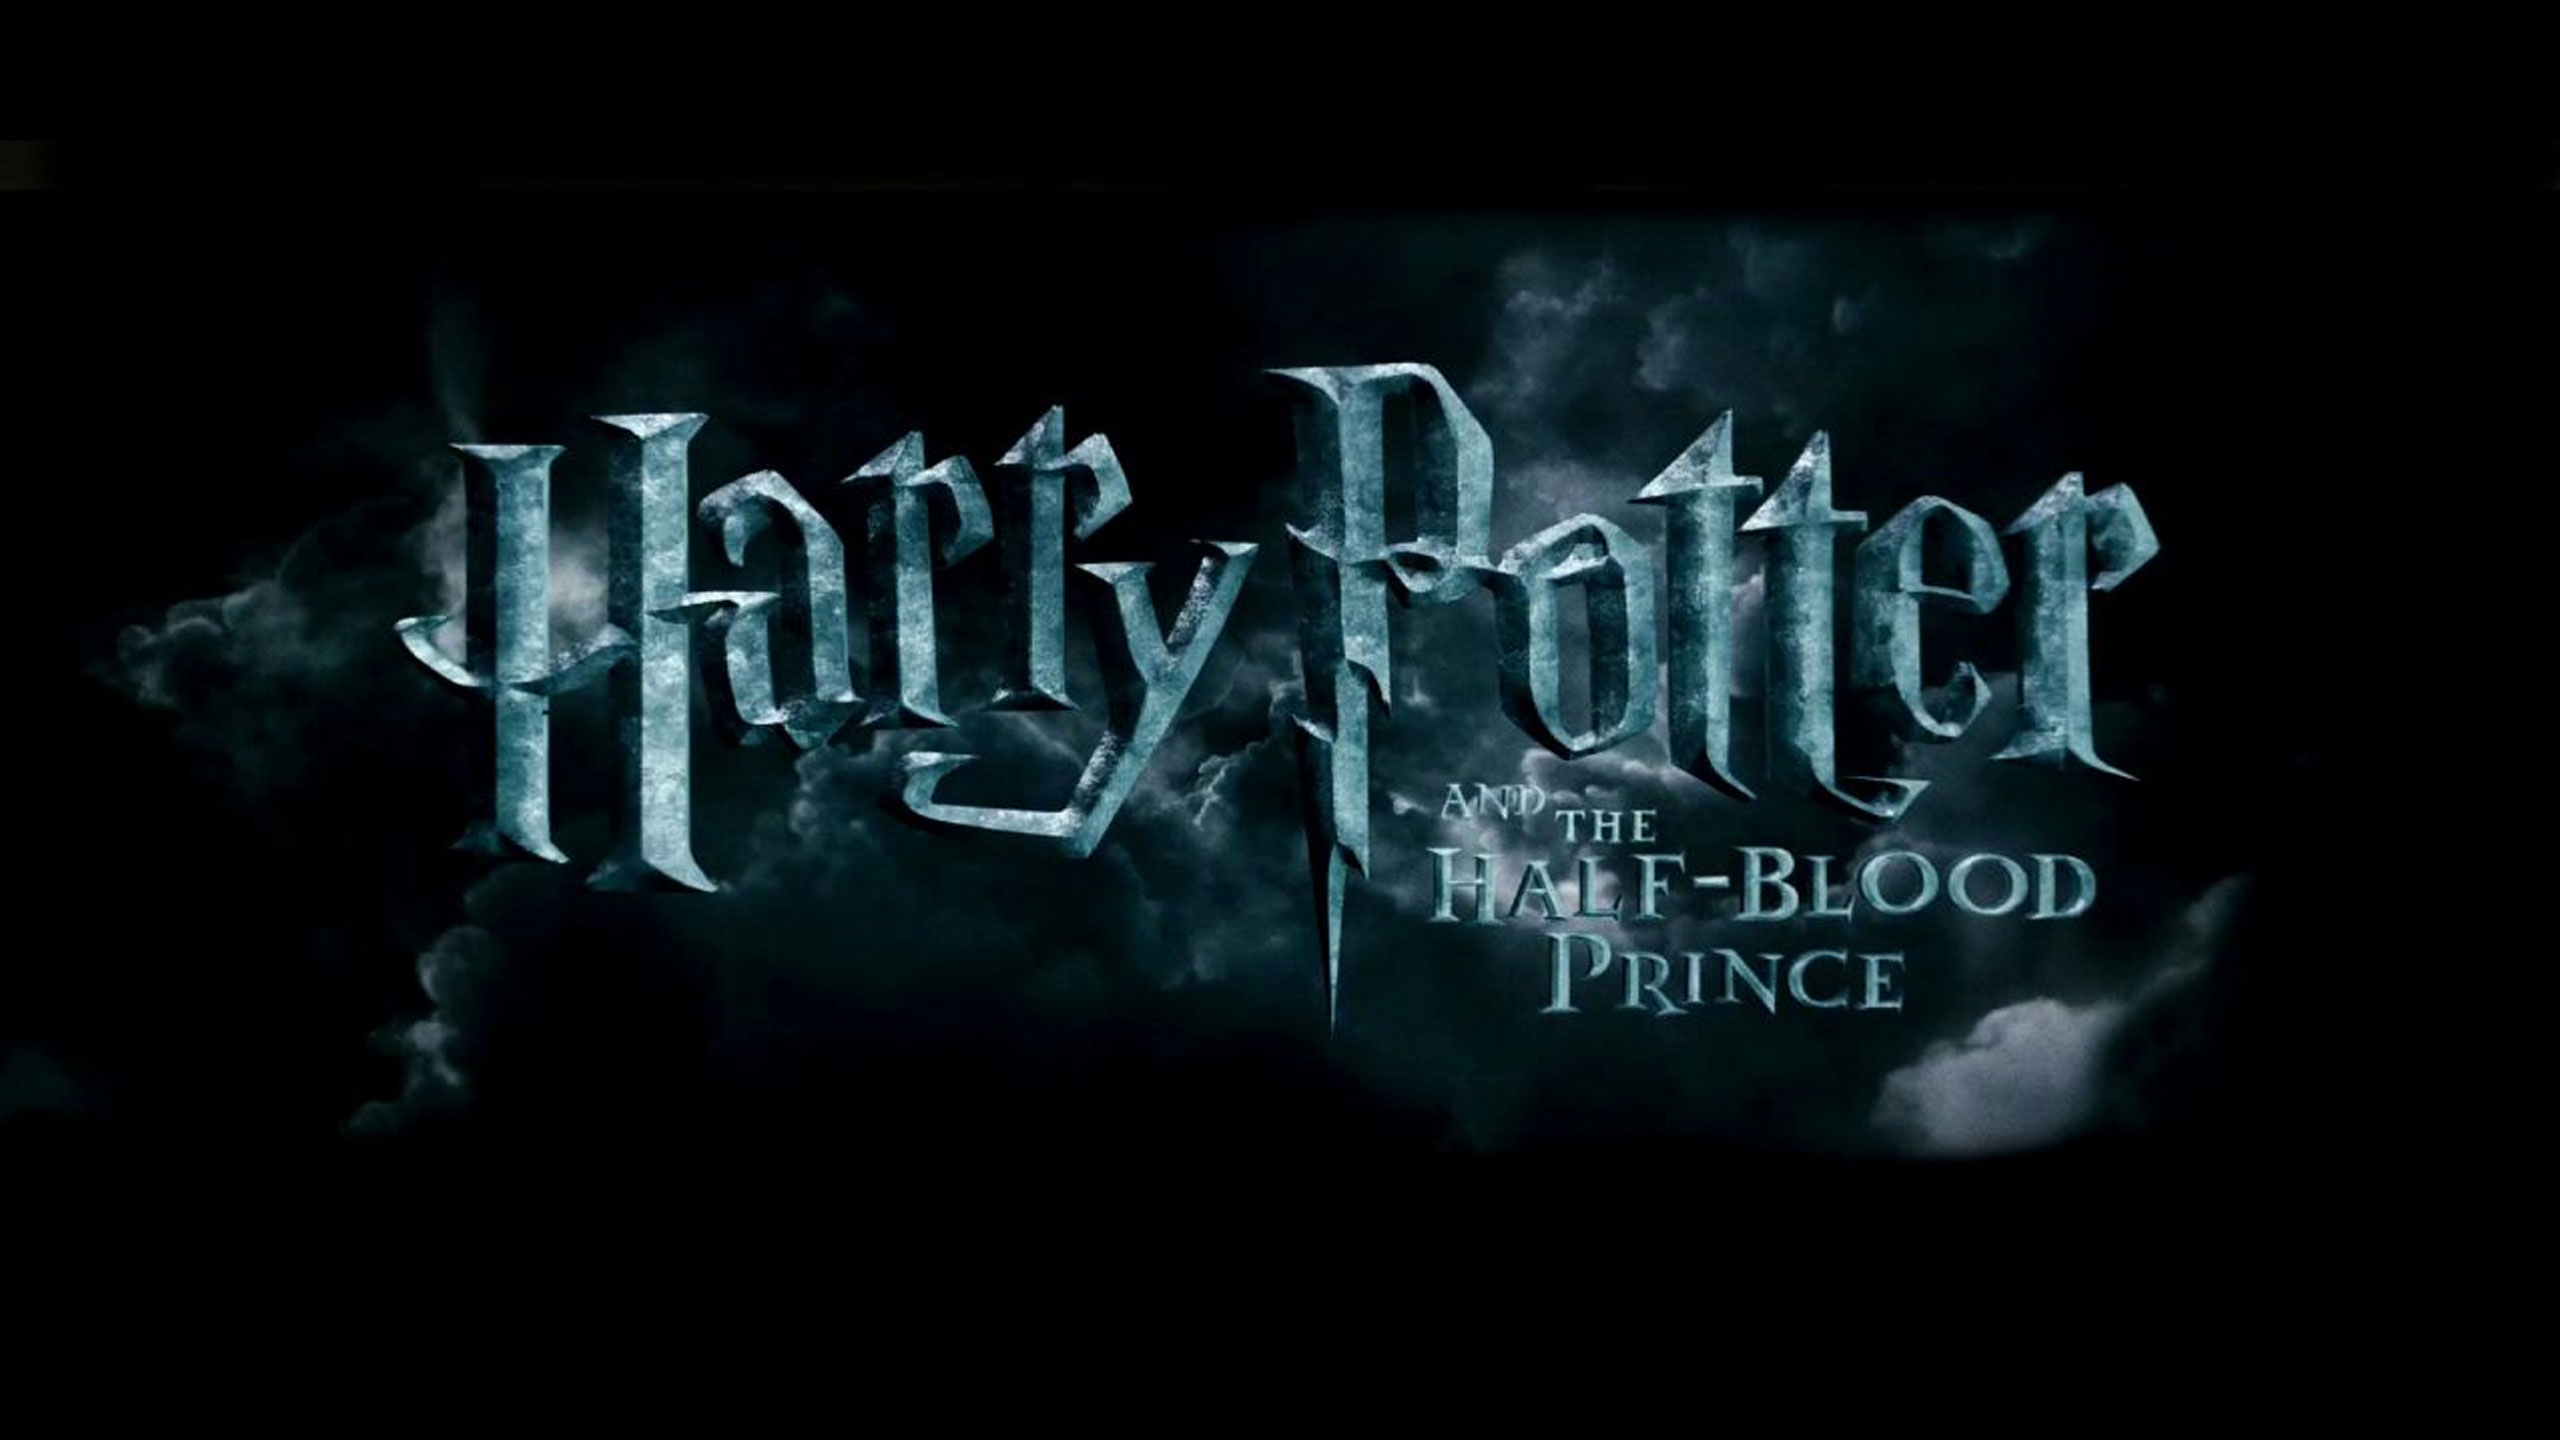 Amazing Harry Potter And The Half-blood Prince Pictures & Backgrounds